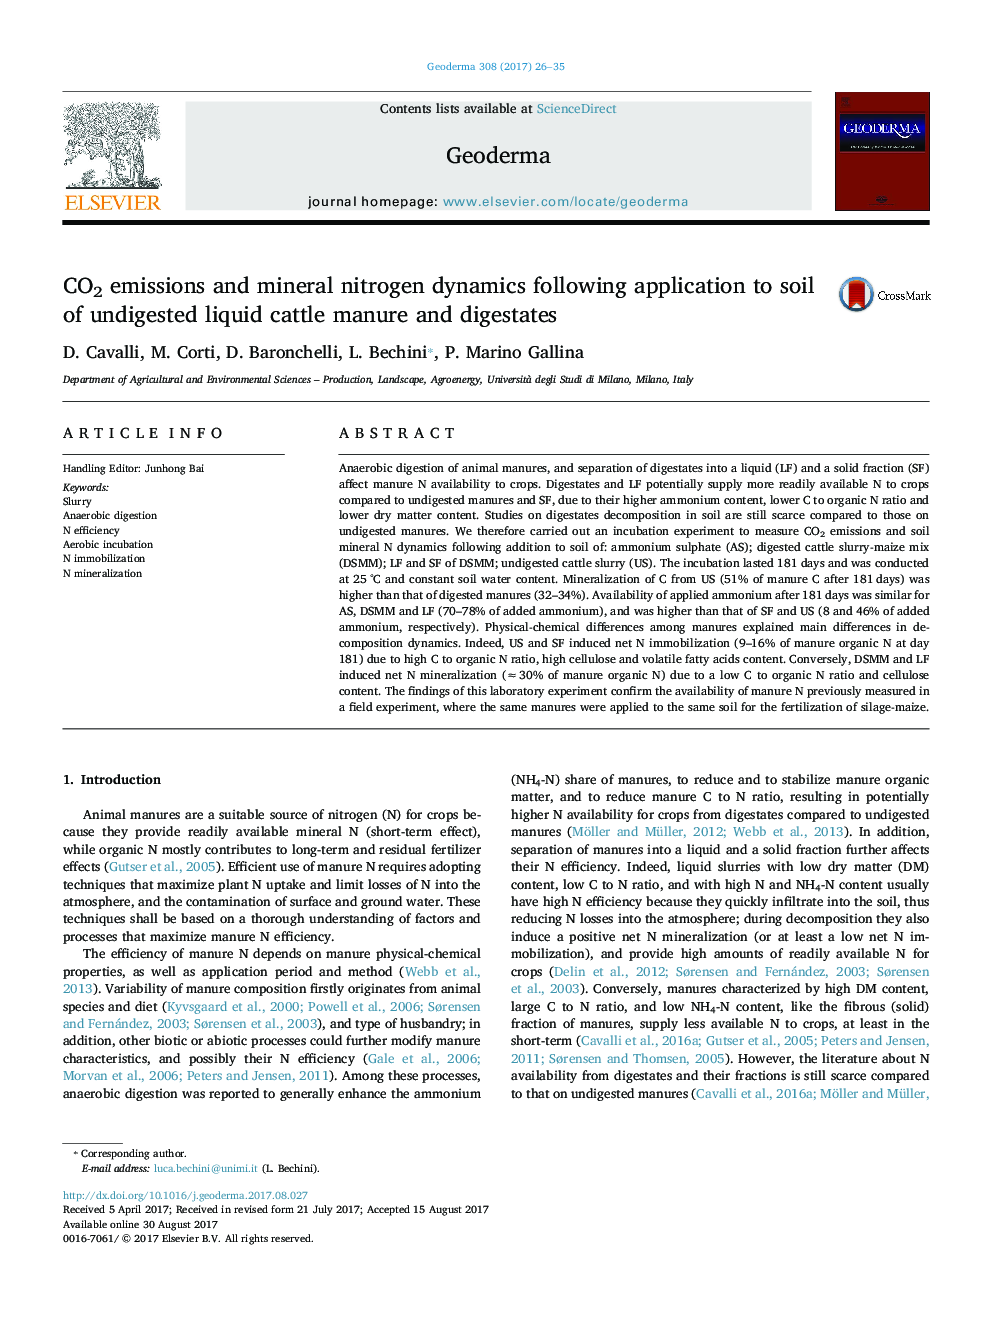 CO2 emissions and mineral nitrogen dynamics following application to soil of undigested liquid cattle manure and digestates